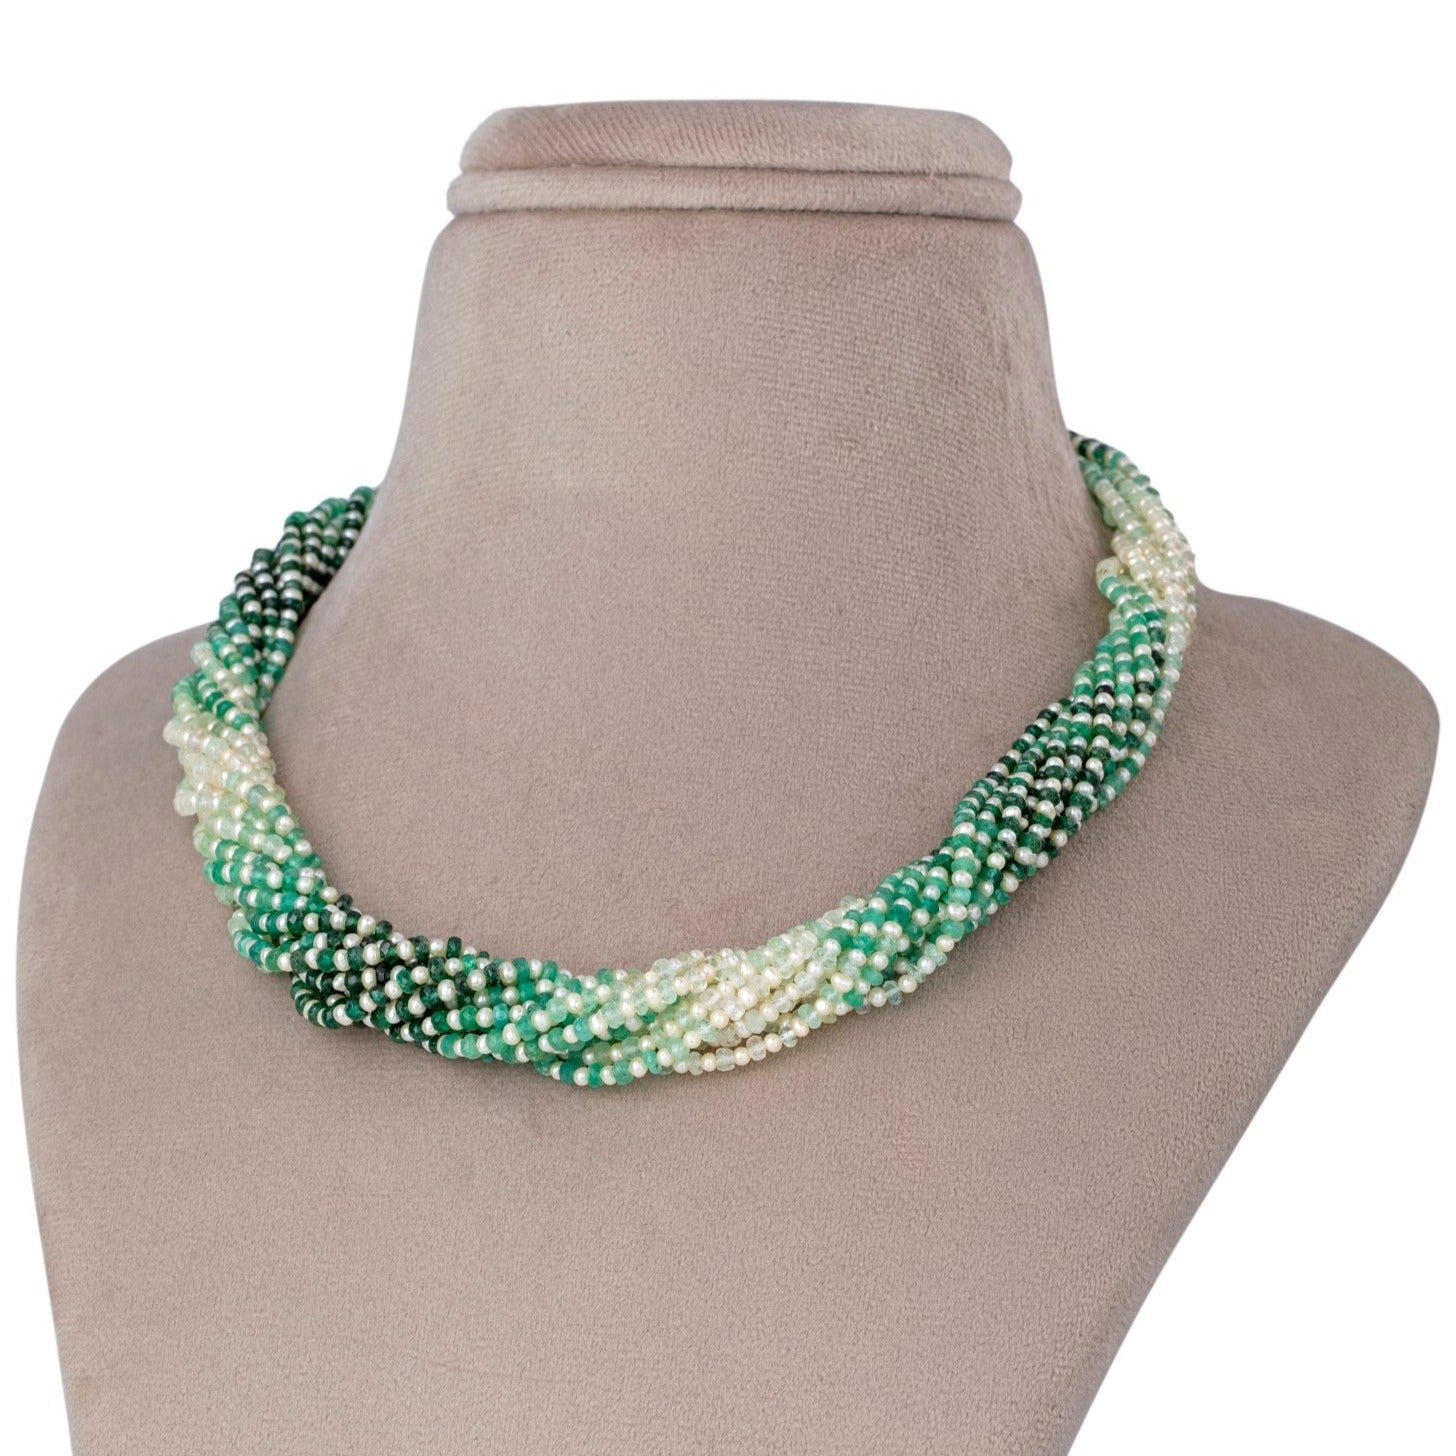 Garden of Pearls: Twisted Emerald and Pearl Necklace